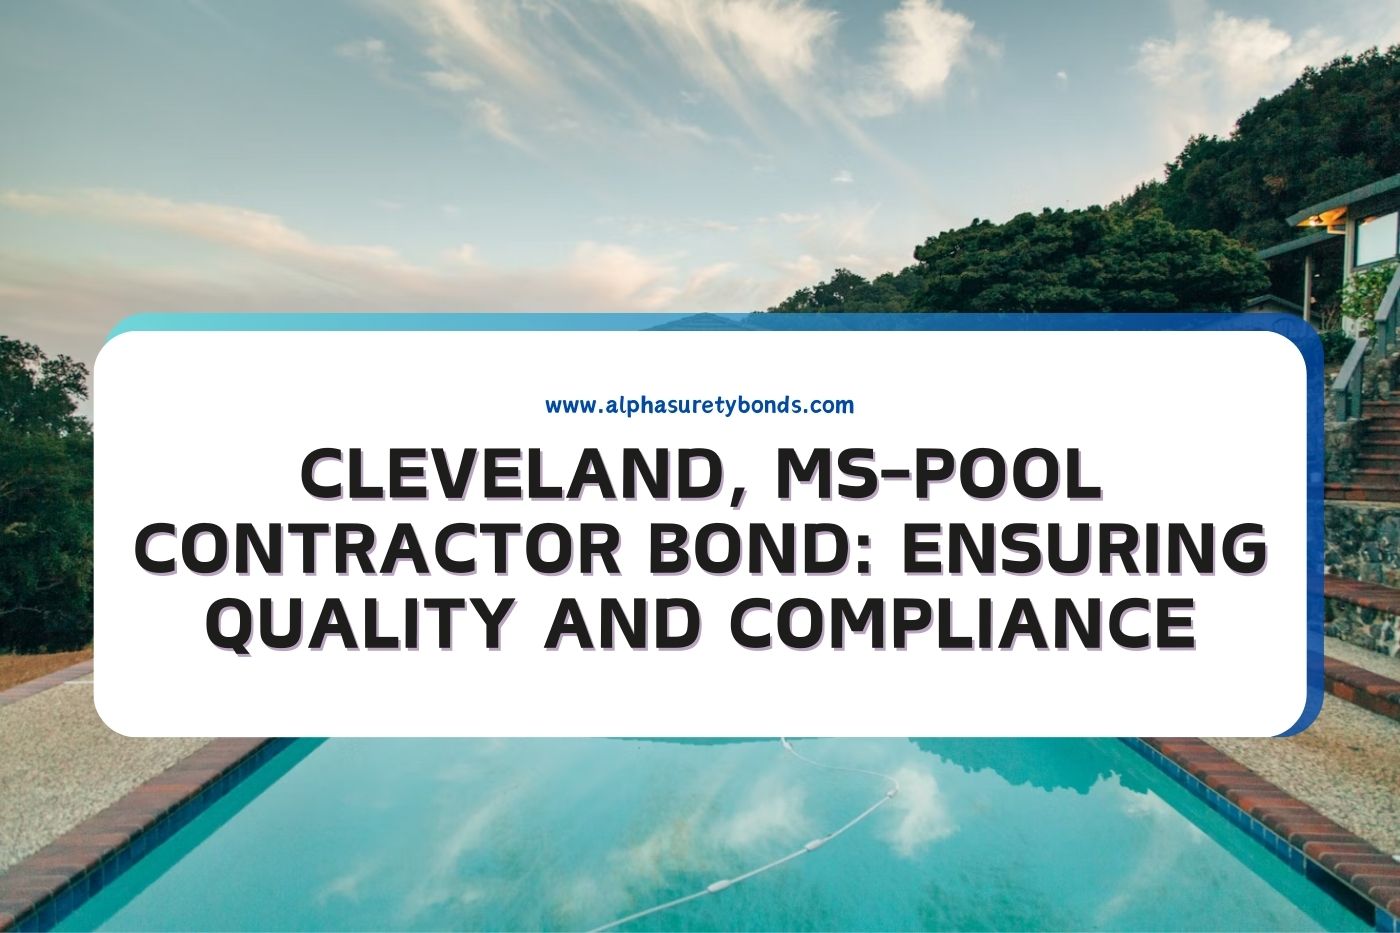 Cleveland, MS-Pool Contractor Bond: Ensuring Quality and Compliance